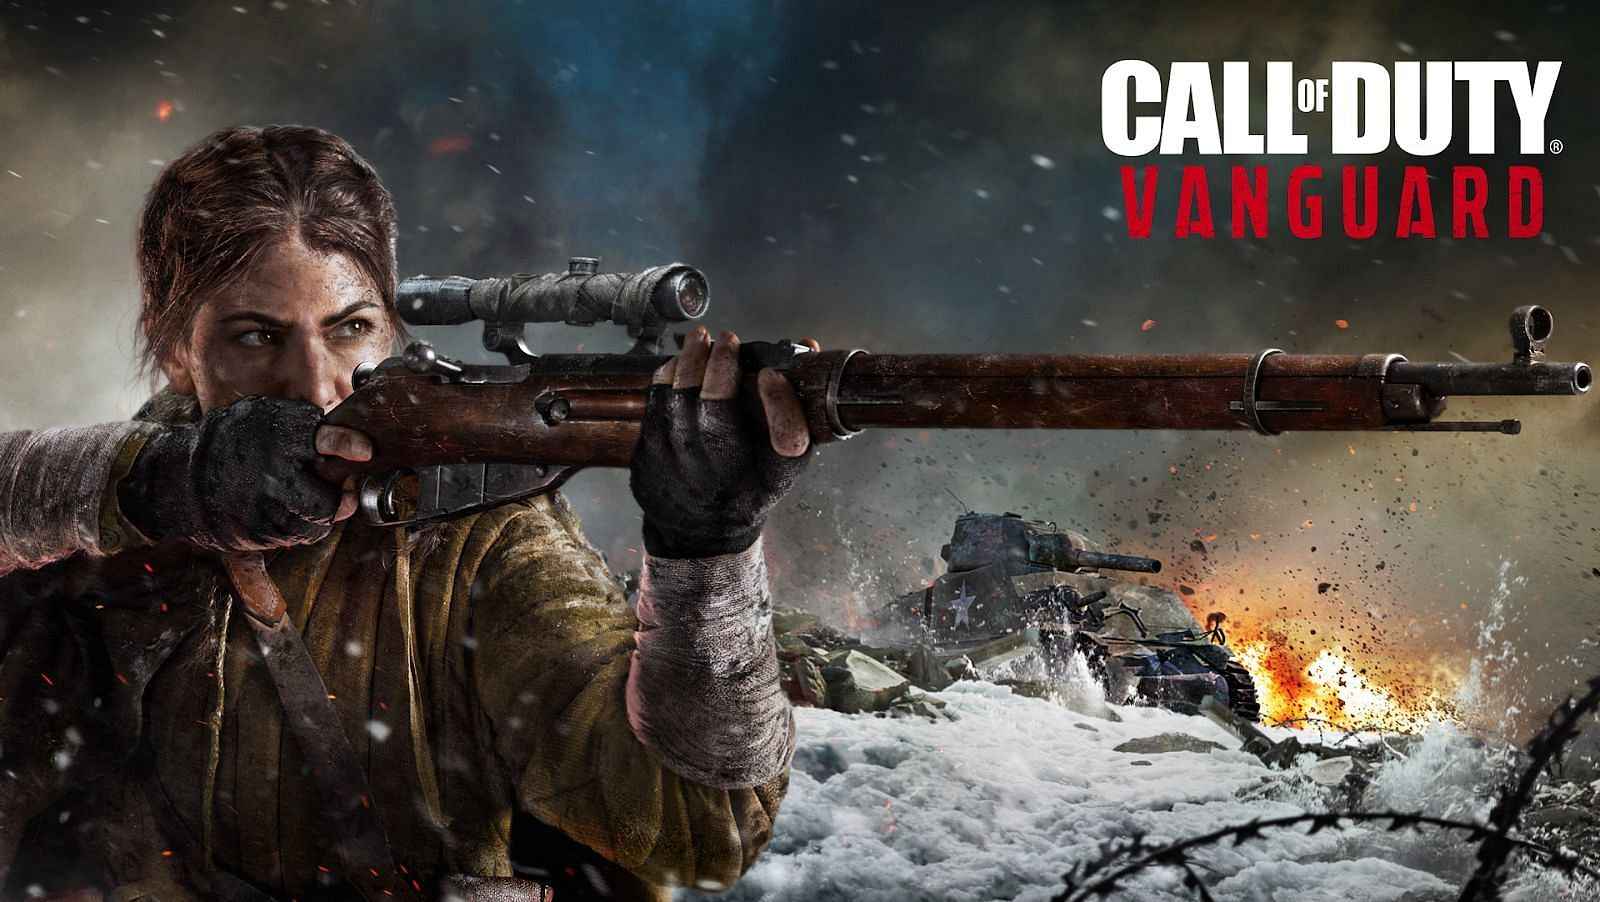 Call of Duty: Vanguard is much awaited (Image by Activision, Sledgehammer Games)